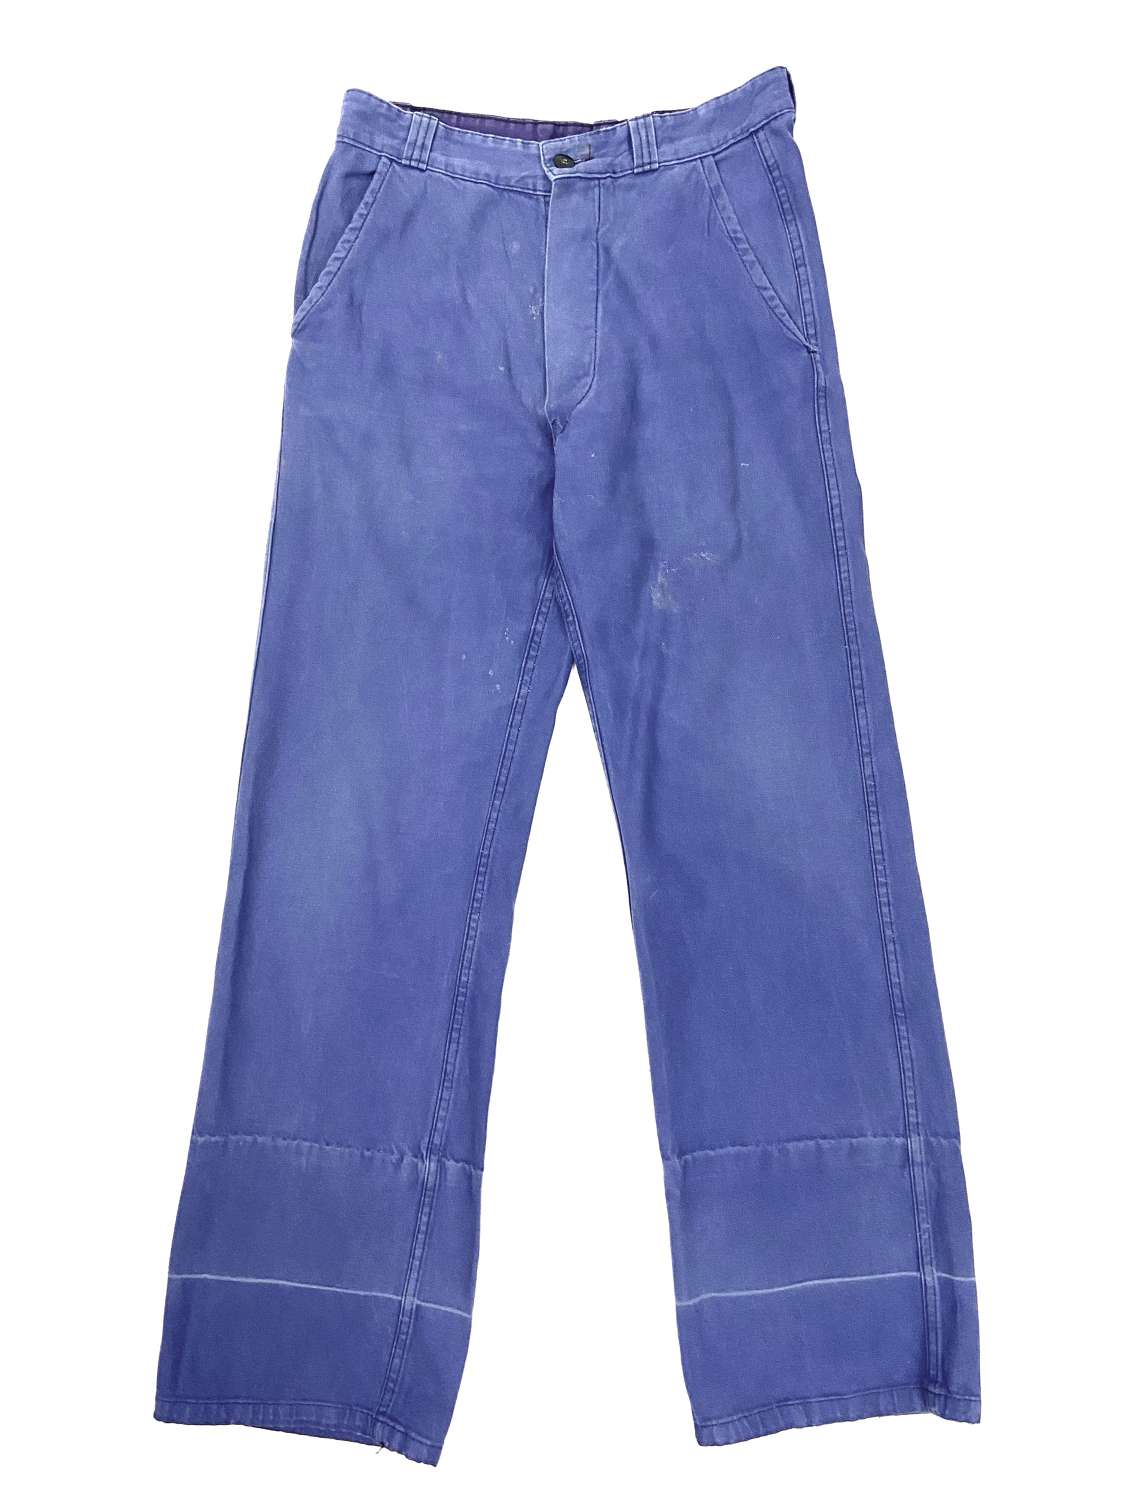 Original 1960s French Blue Workwear Trousers